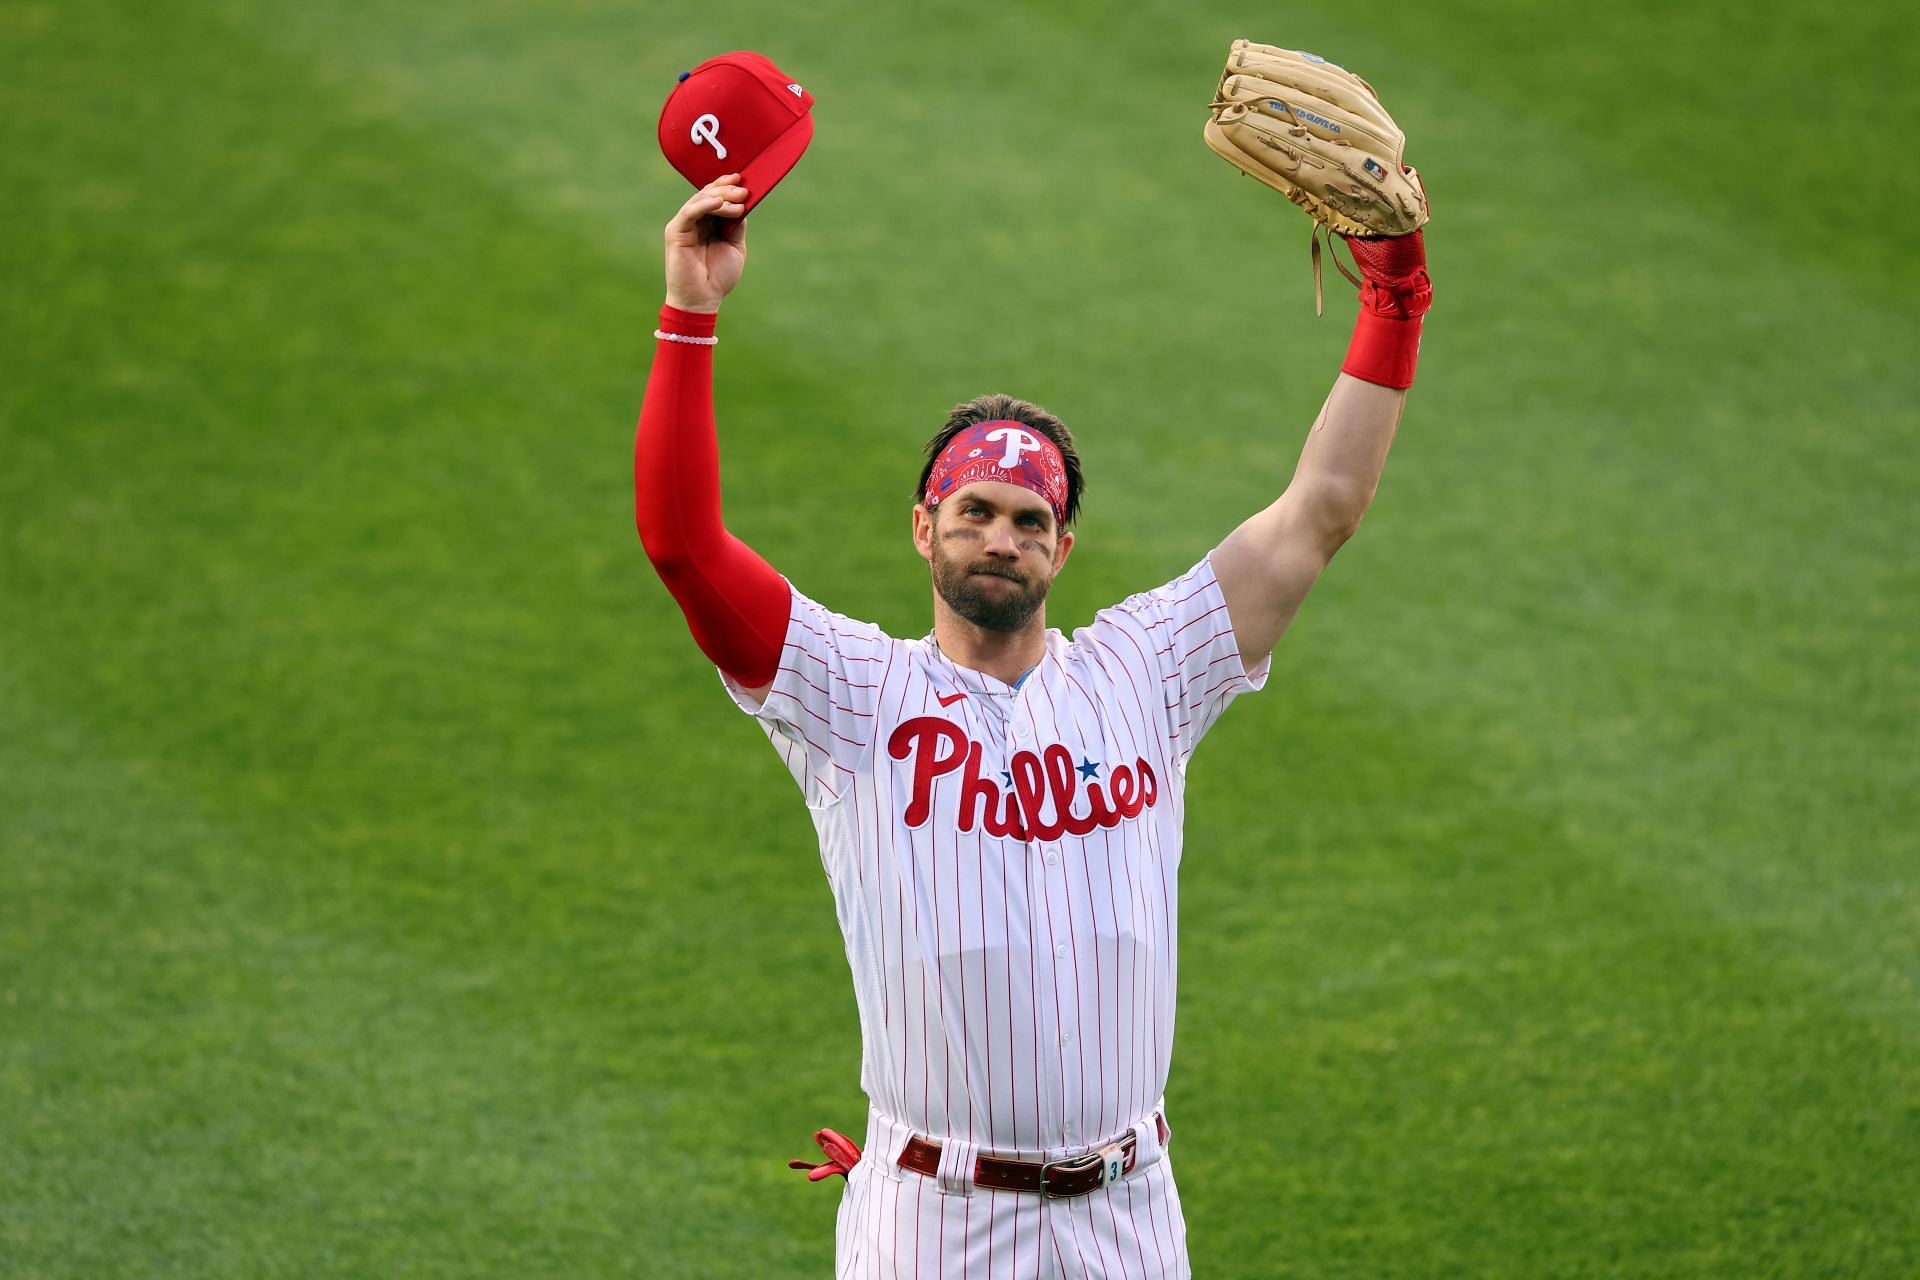 Outfielder Harper of the Philadelphia Phillies has become a fan favorite due to this constant willingness to involve fans who look up to him